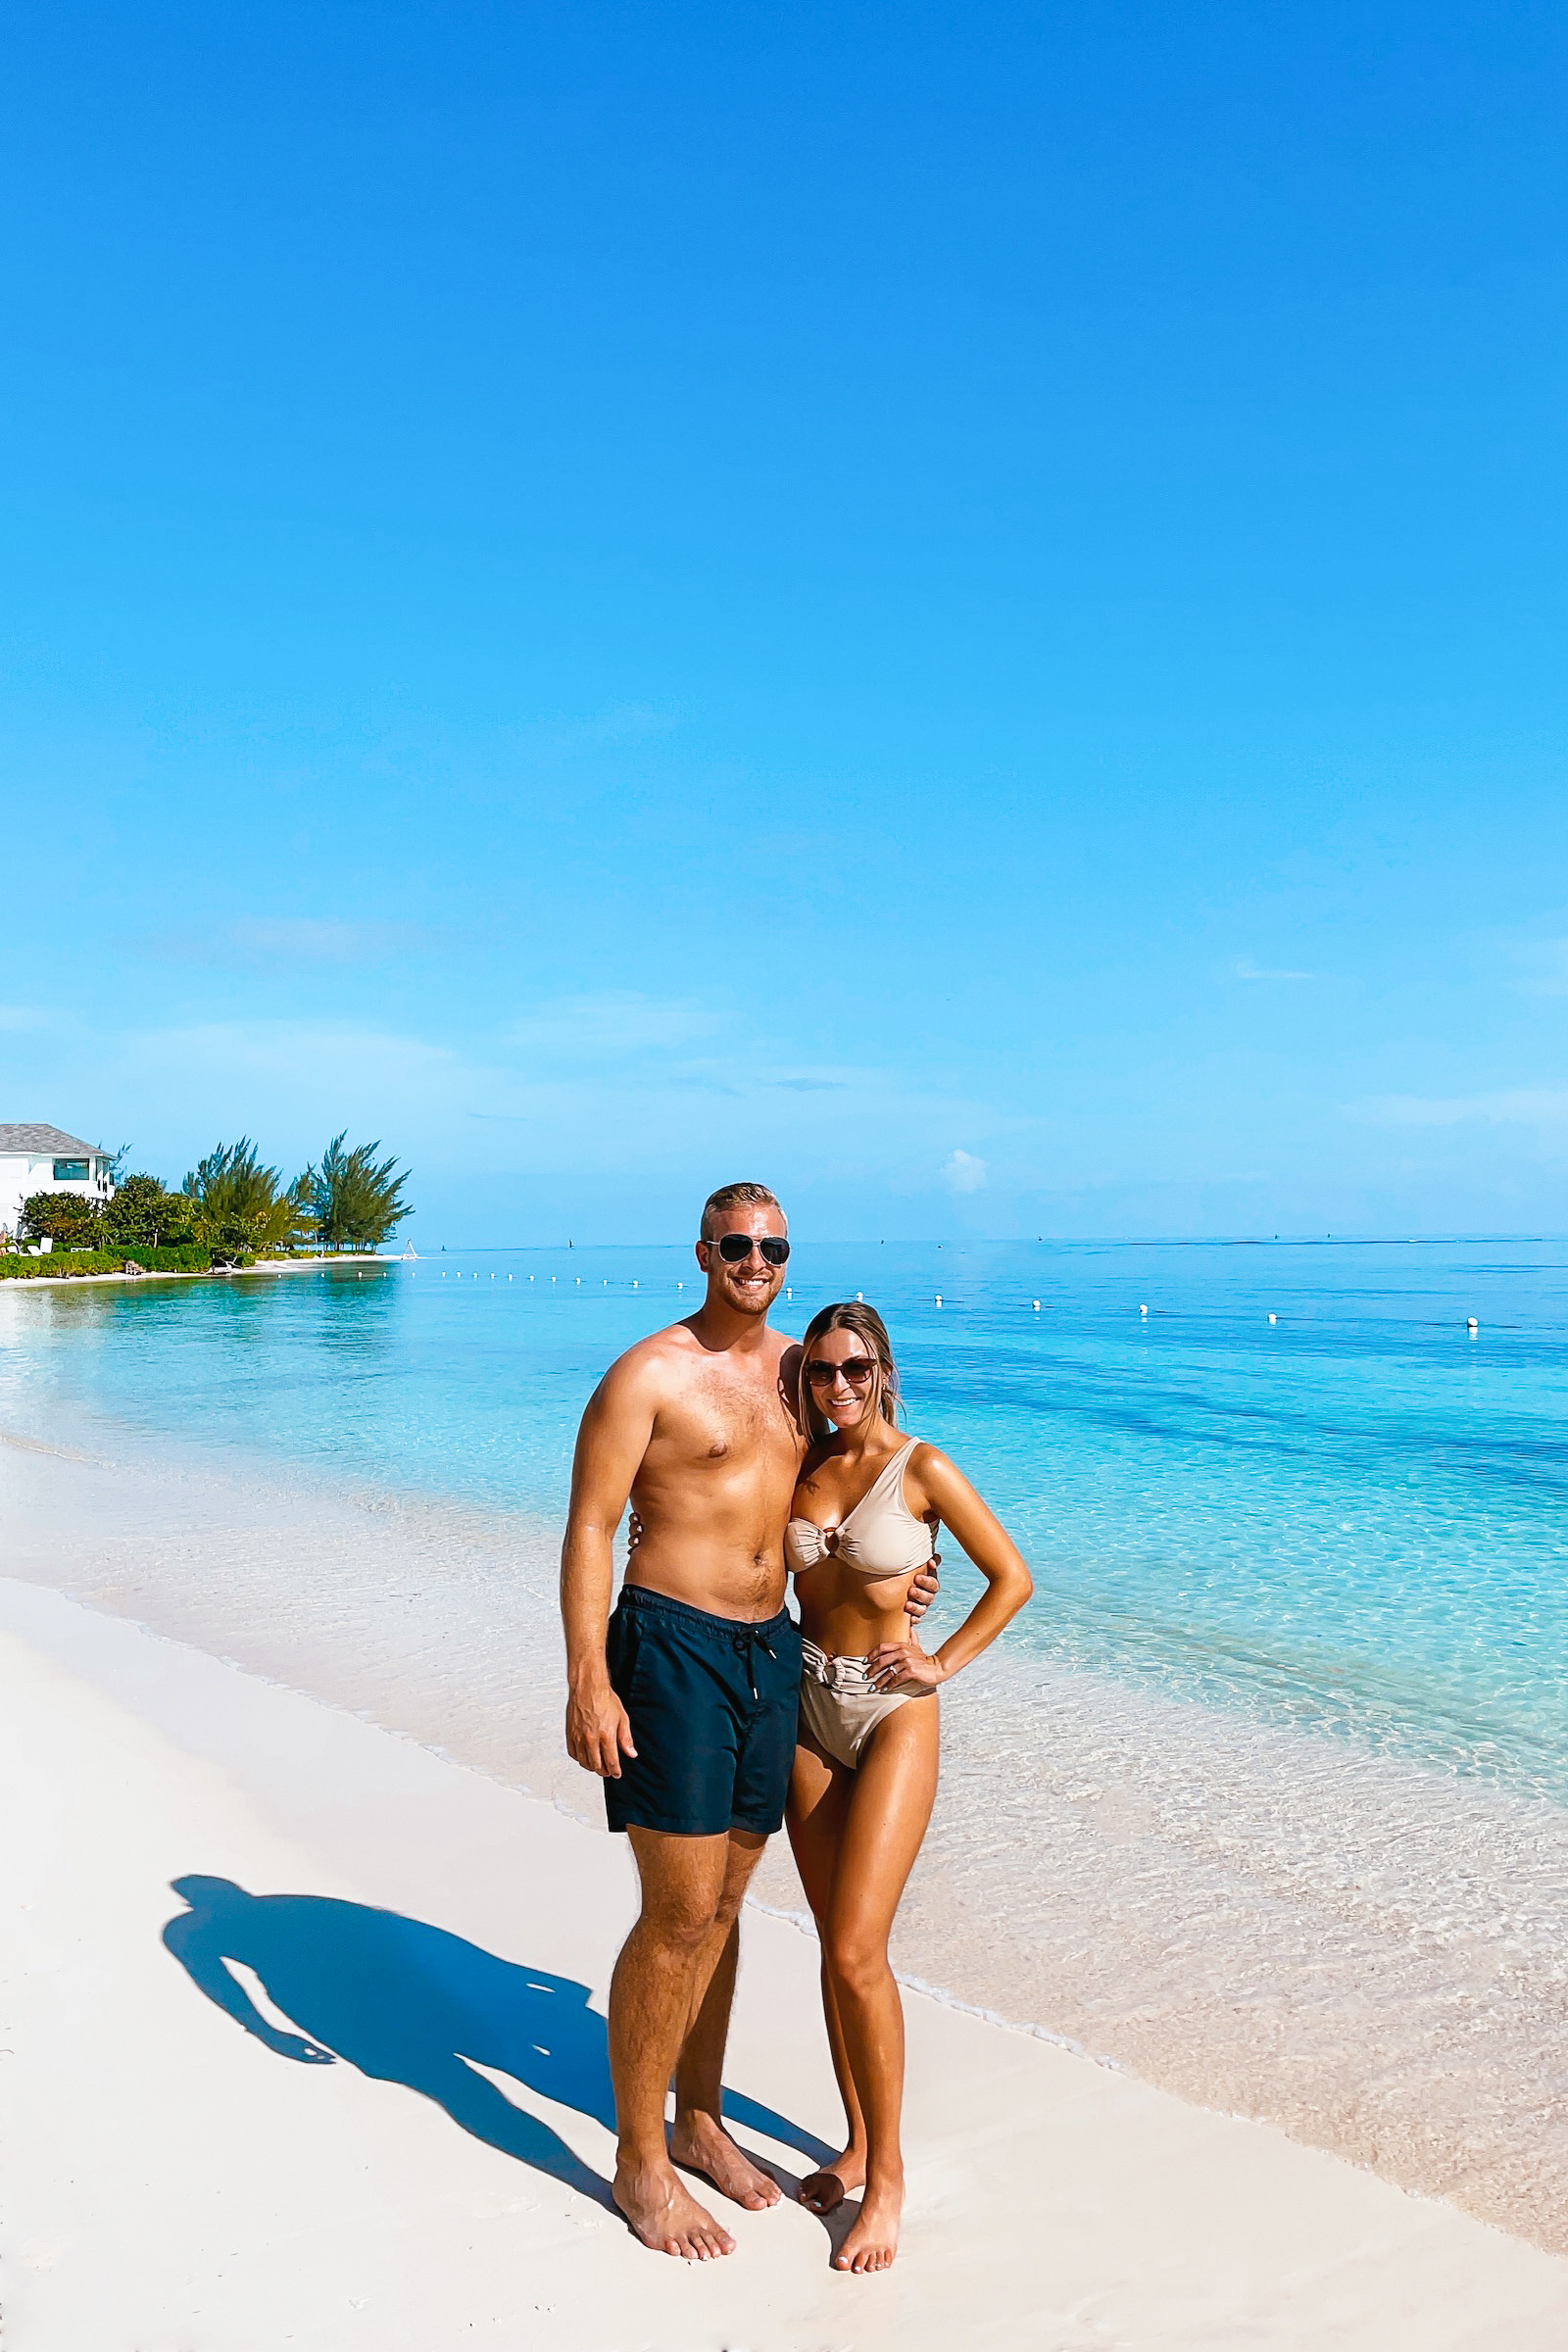 A romantic day at the beach in Montego Bay